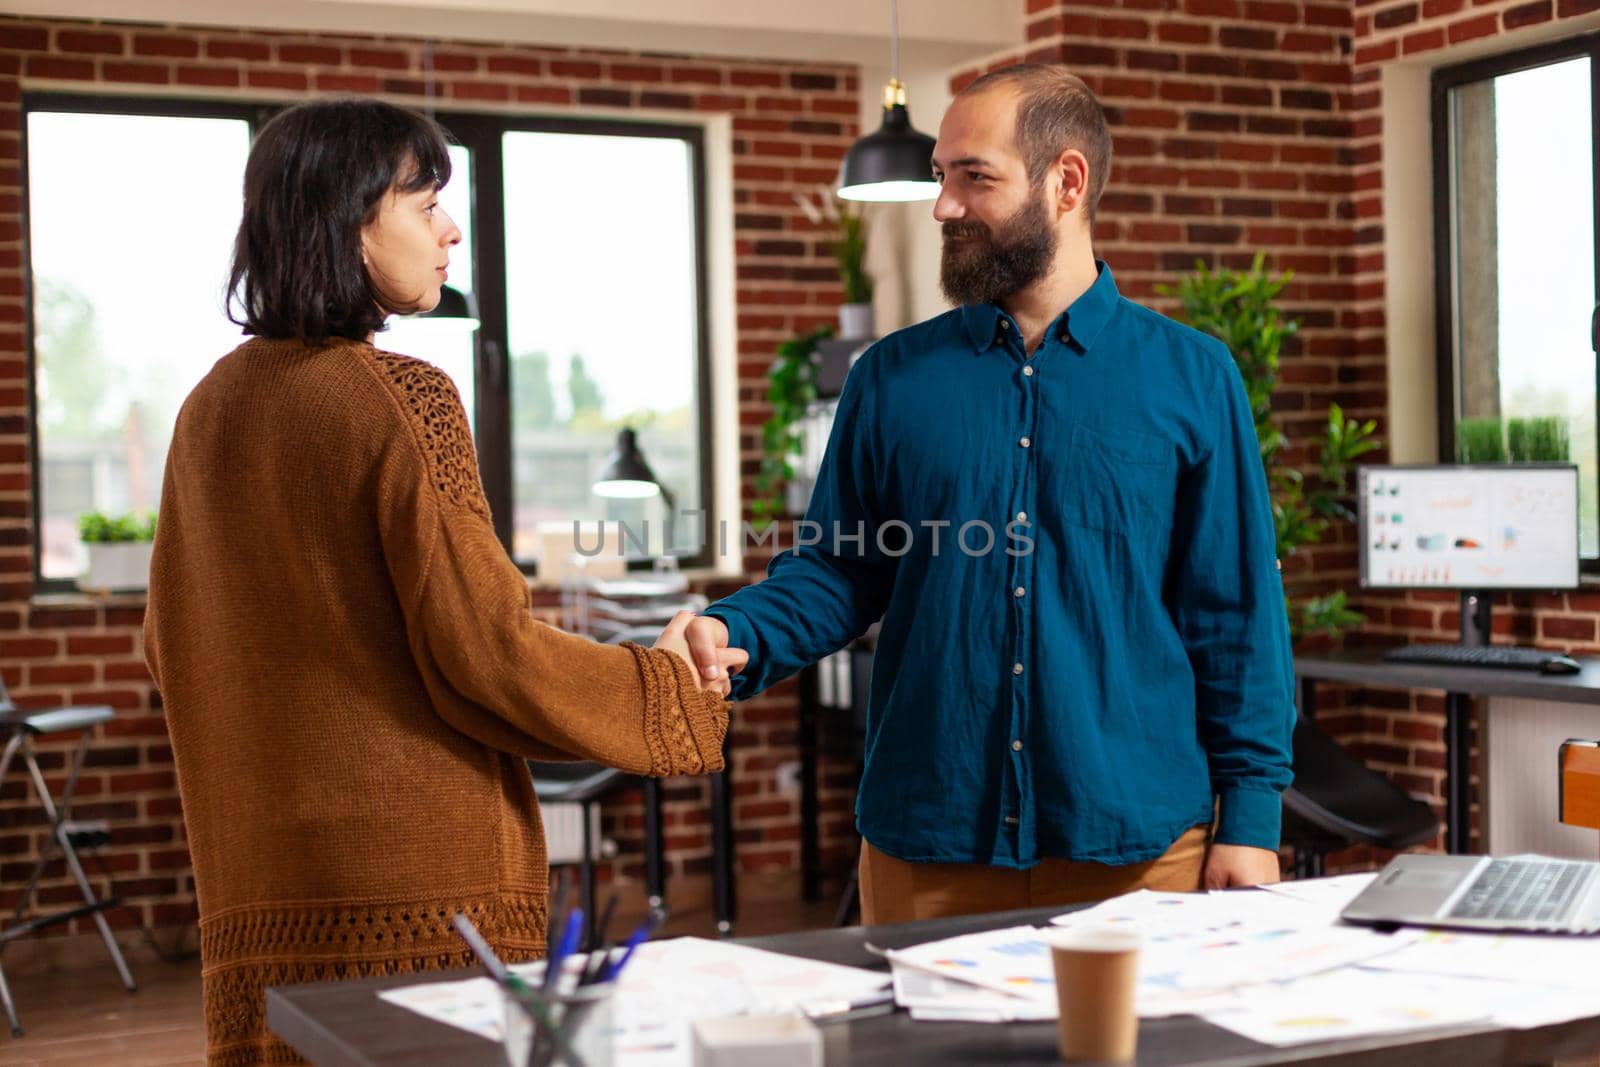 Businesspeople shaking hands during business meeting in startup office working at company investment preparing marketing presentation. Financial team analyzing management papaerwork with strategy